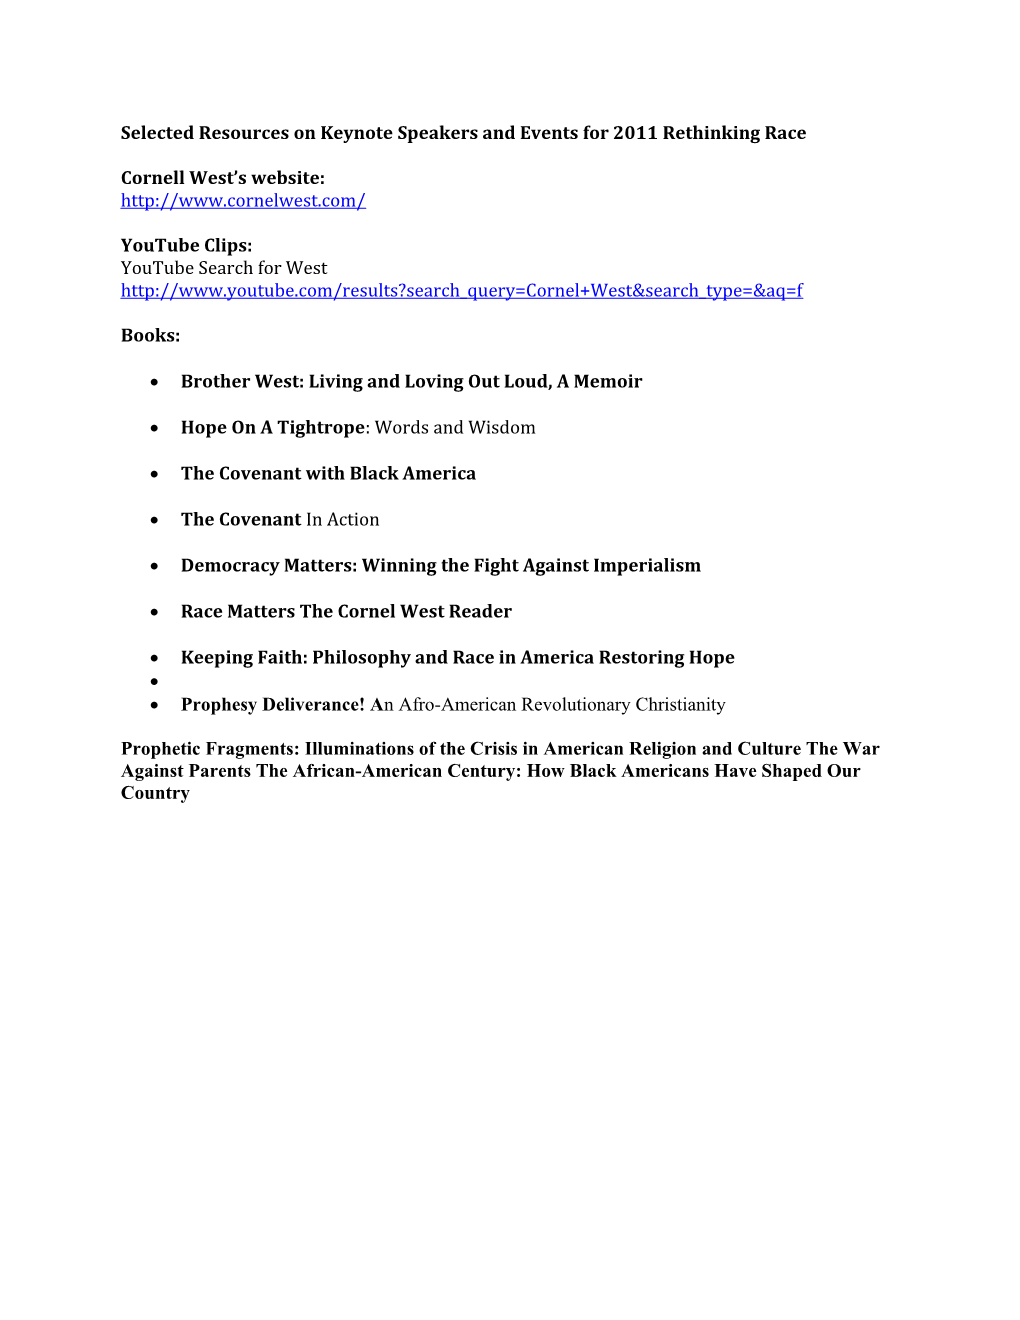 Selected Resources on Keynote Speakers and Events for 2011 Rethinking Race